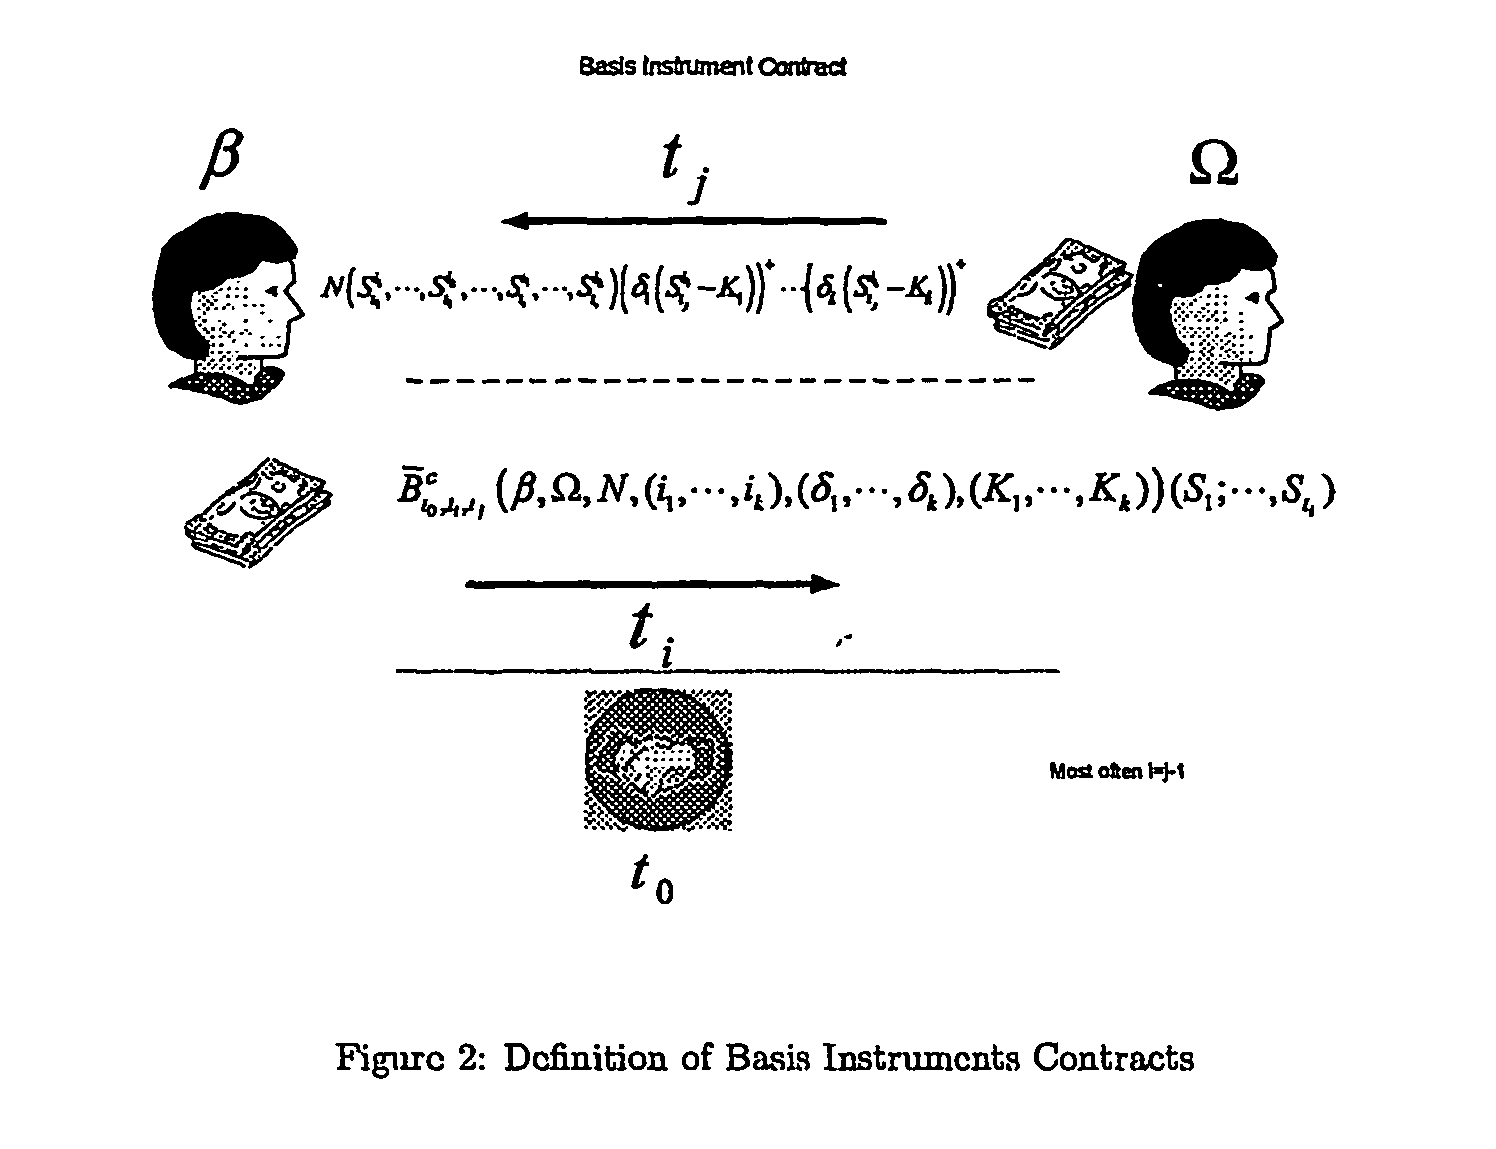 Methods, systems and computer program products to facilitate the formation and trading of derivatives contracts